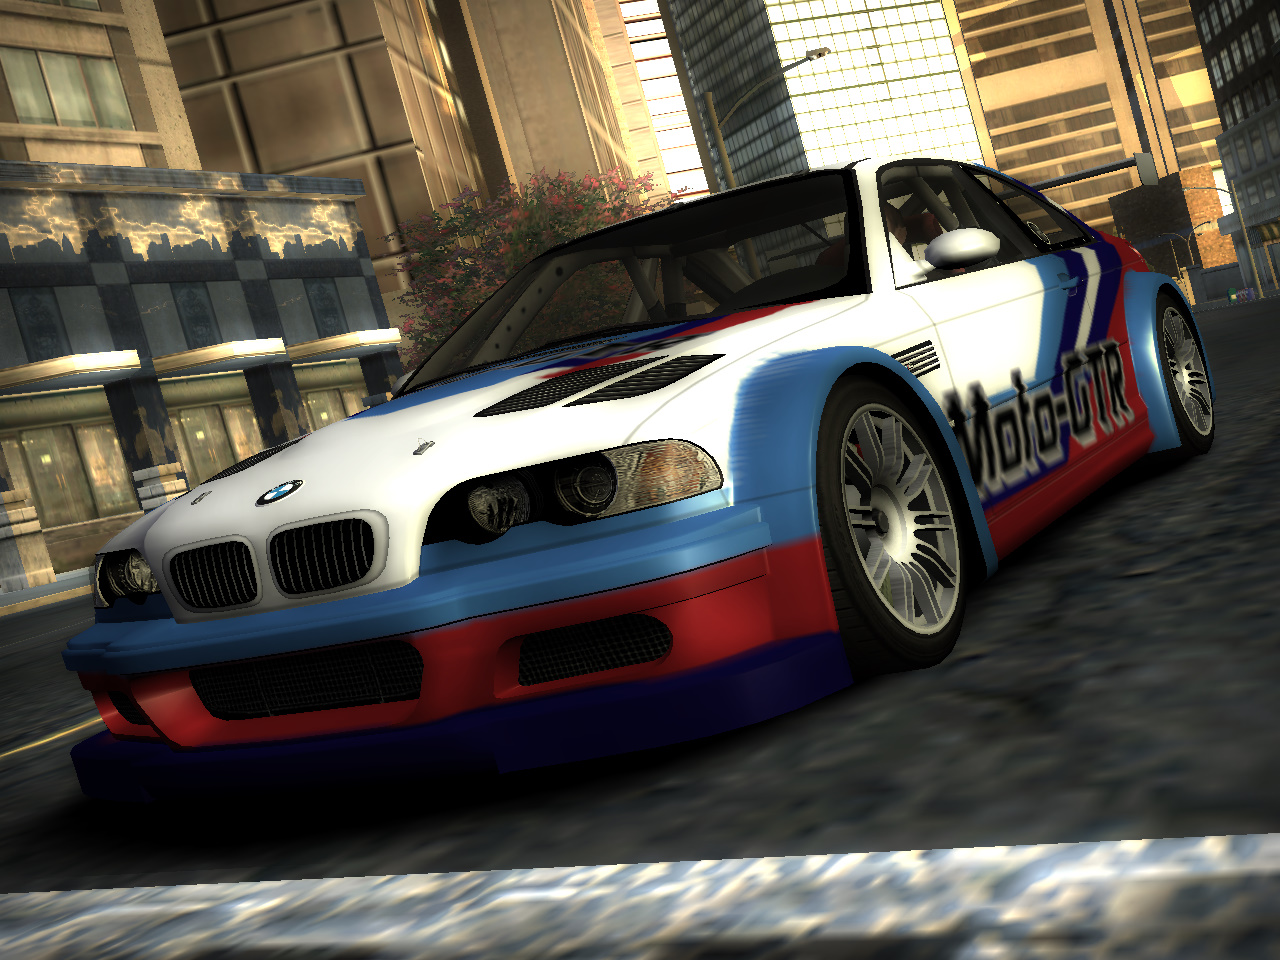 Need for speed most wanted 2 bmw m3 gtr download torrent